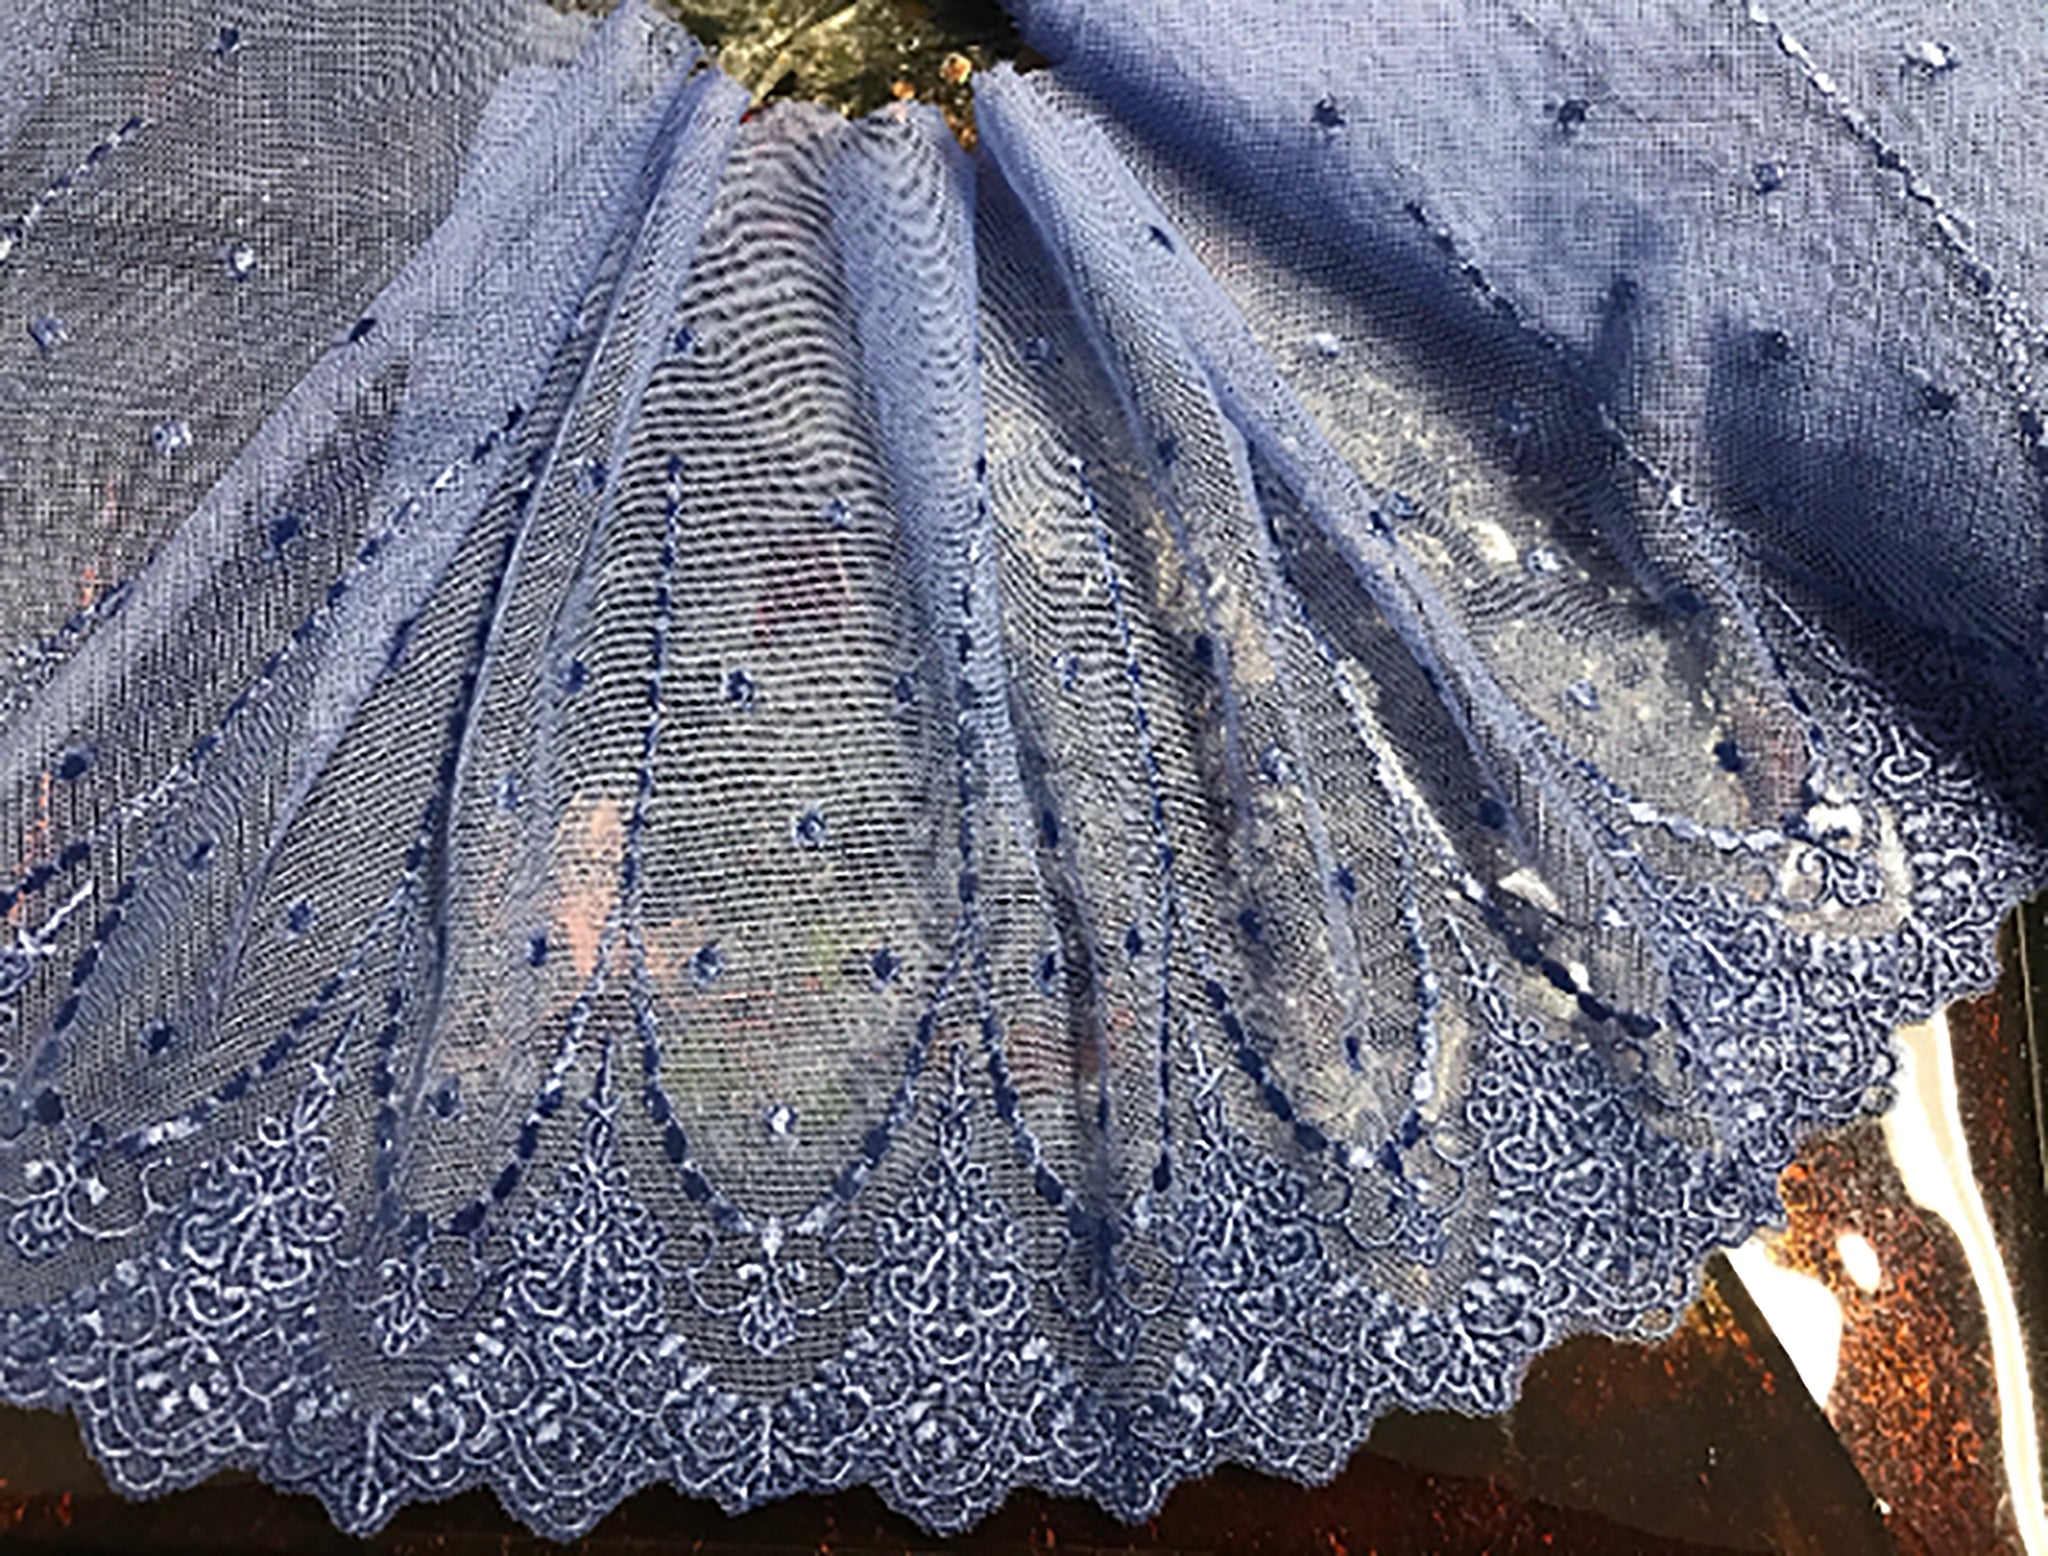 Blue Shiny Embroidery on Blue Soft Tulle Background - Italian Lace - 20.5 cm Wide.